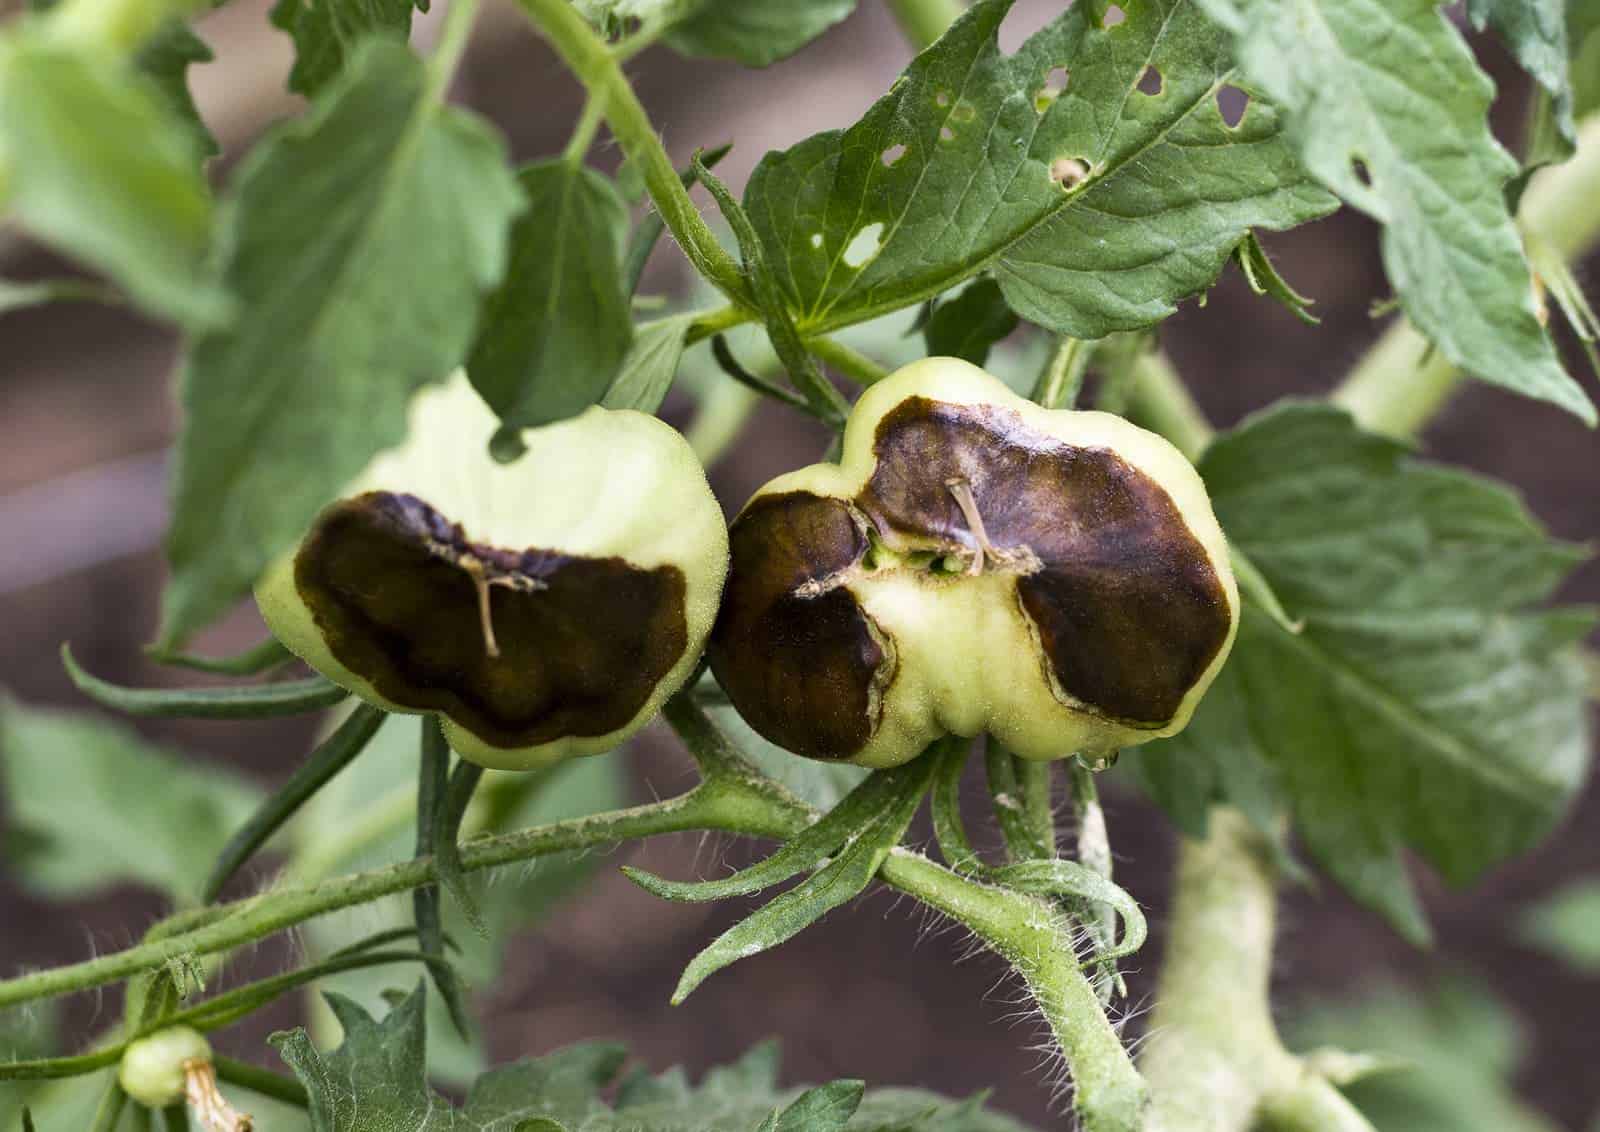 What causes tomato blossom end rot